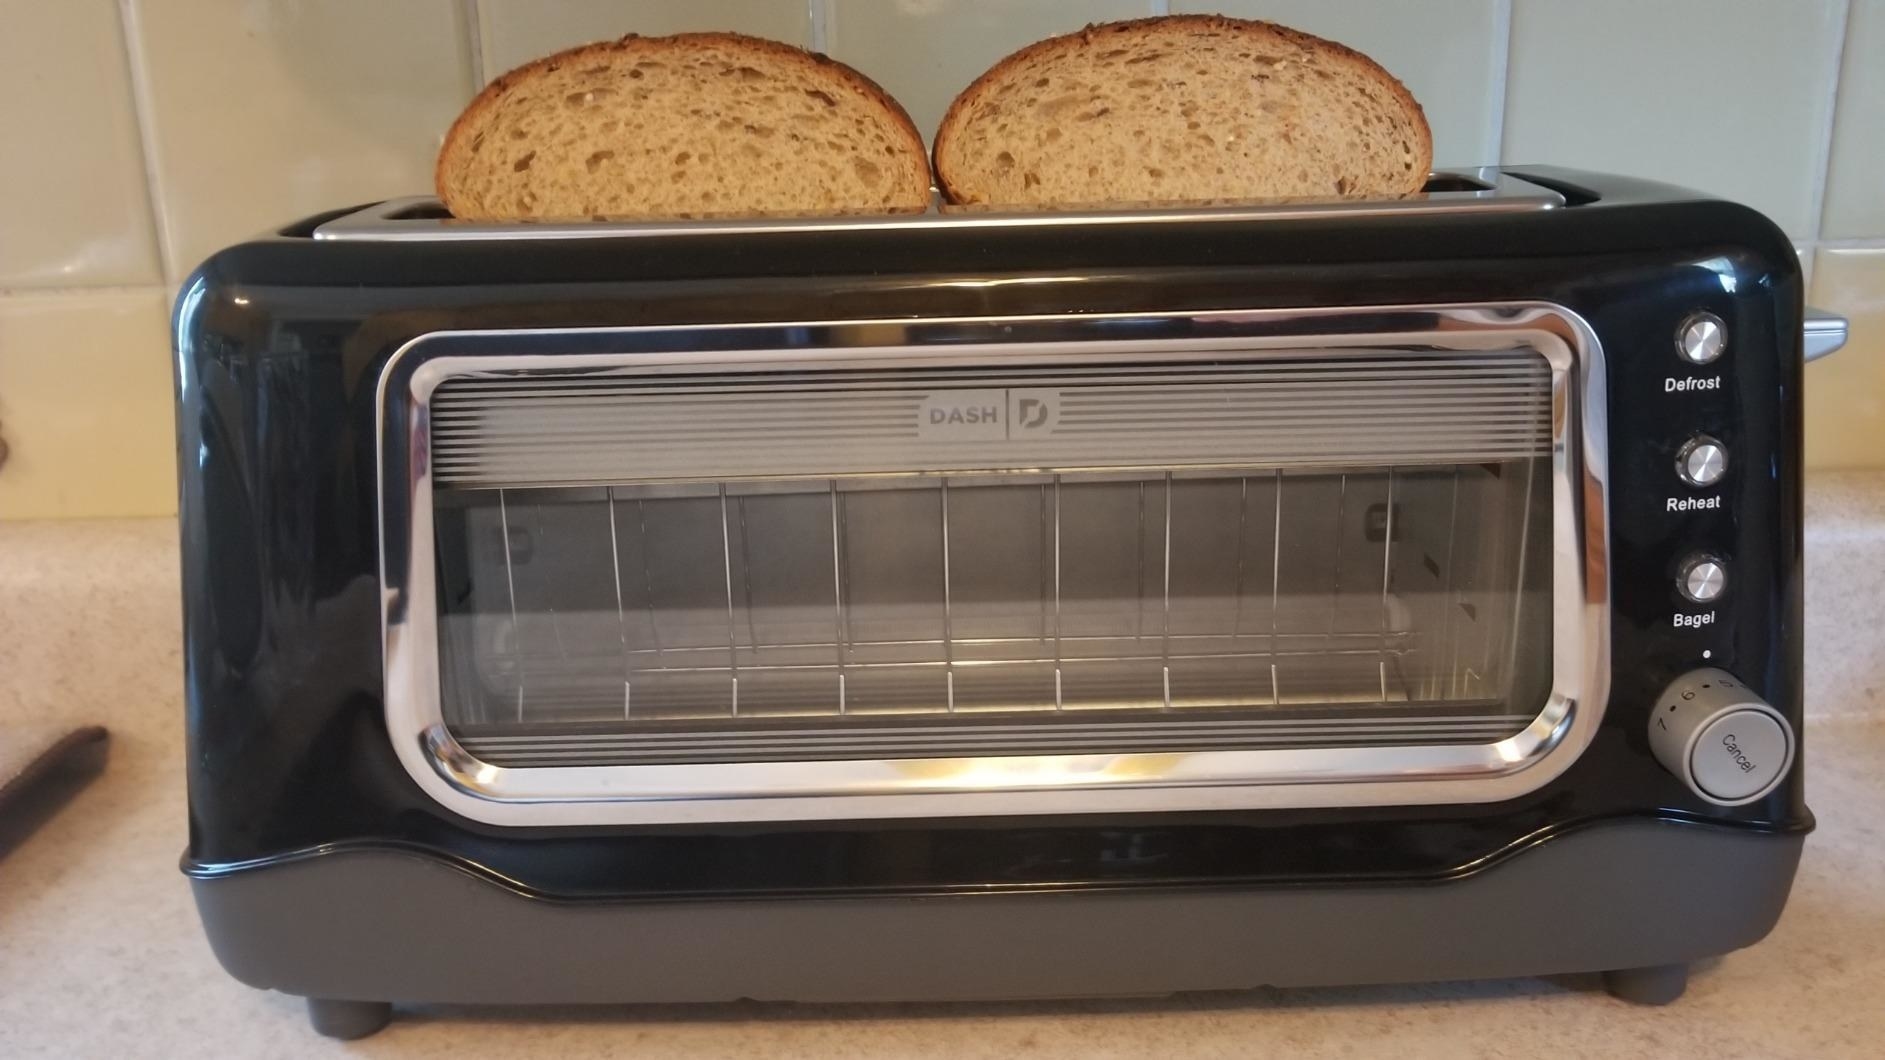 Reviewer image of toaster with two slices of bread in it